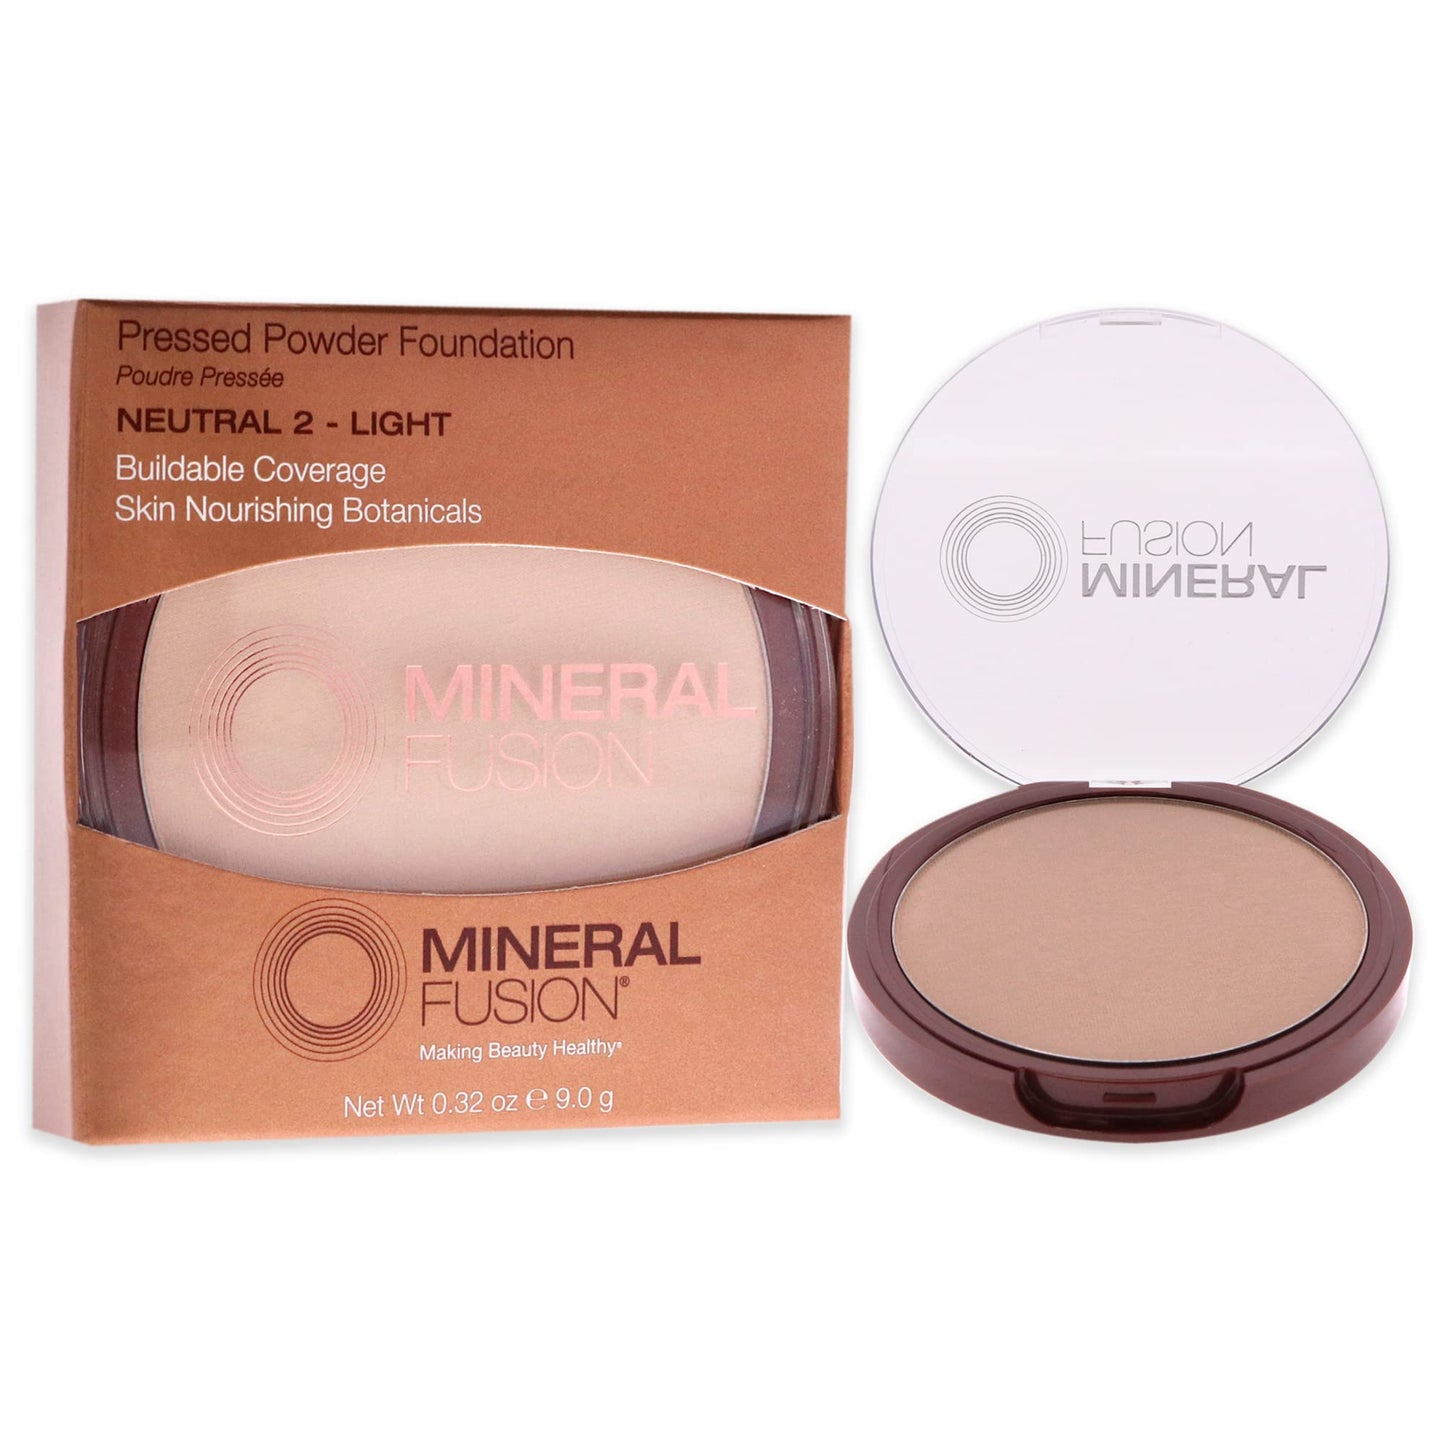 Mineral Fusion Pressed Powder Foundation, Neutral 2 - Fair/Med Skin w/Neutral Undertones, Age Defying Foundation Makeup with Matte Finish, Talc Free Face Powder, Hypoallergenic, Cruelty-Free, 0.32 Oz